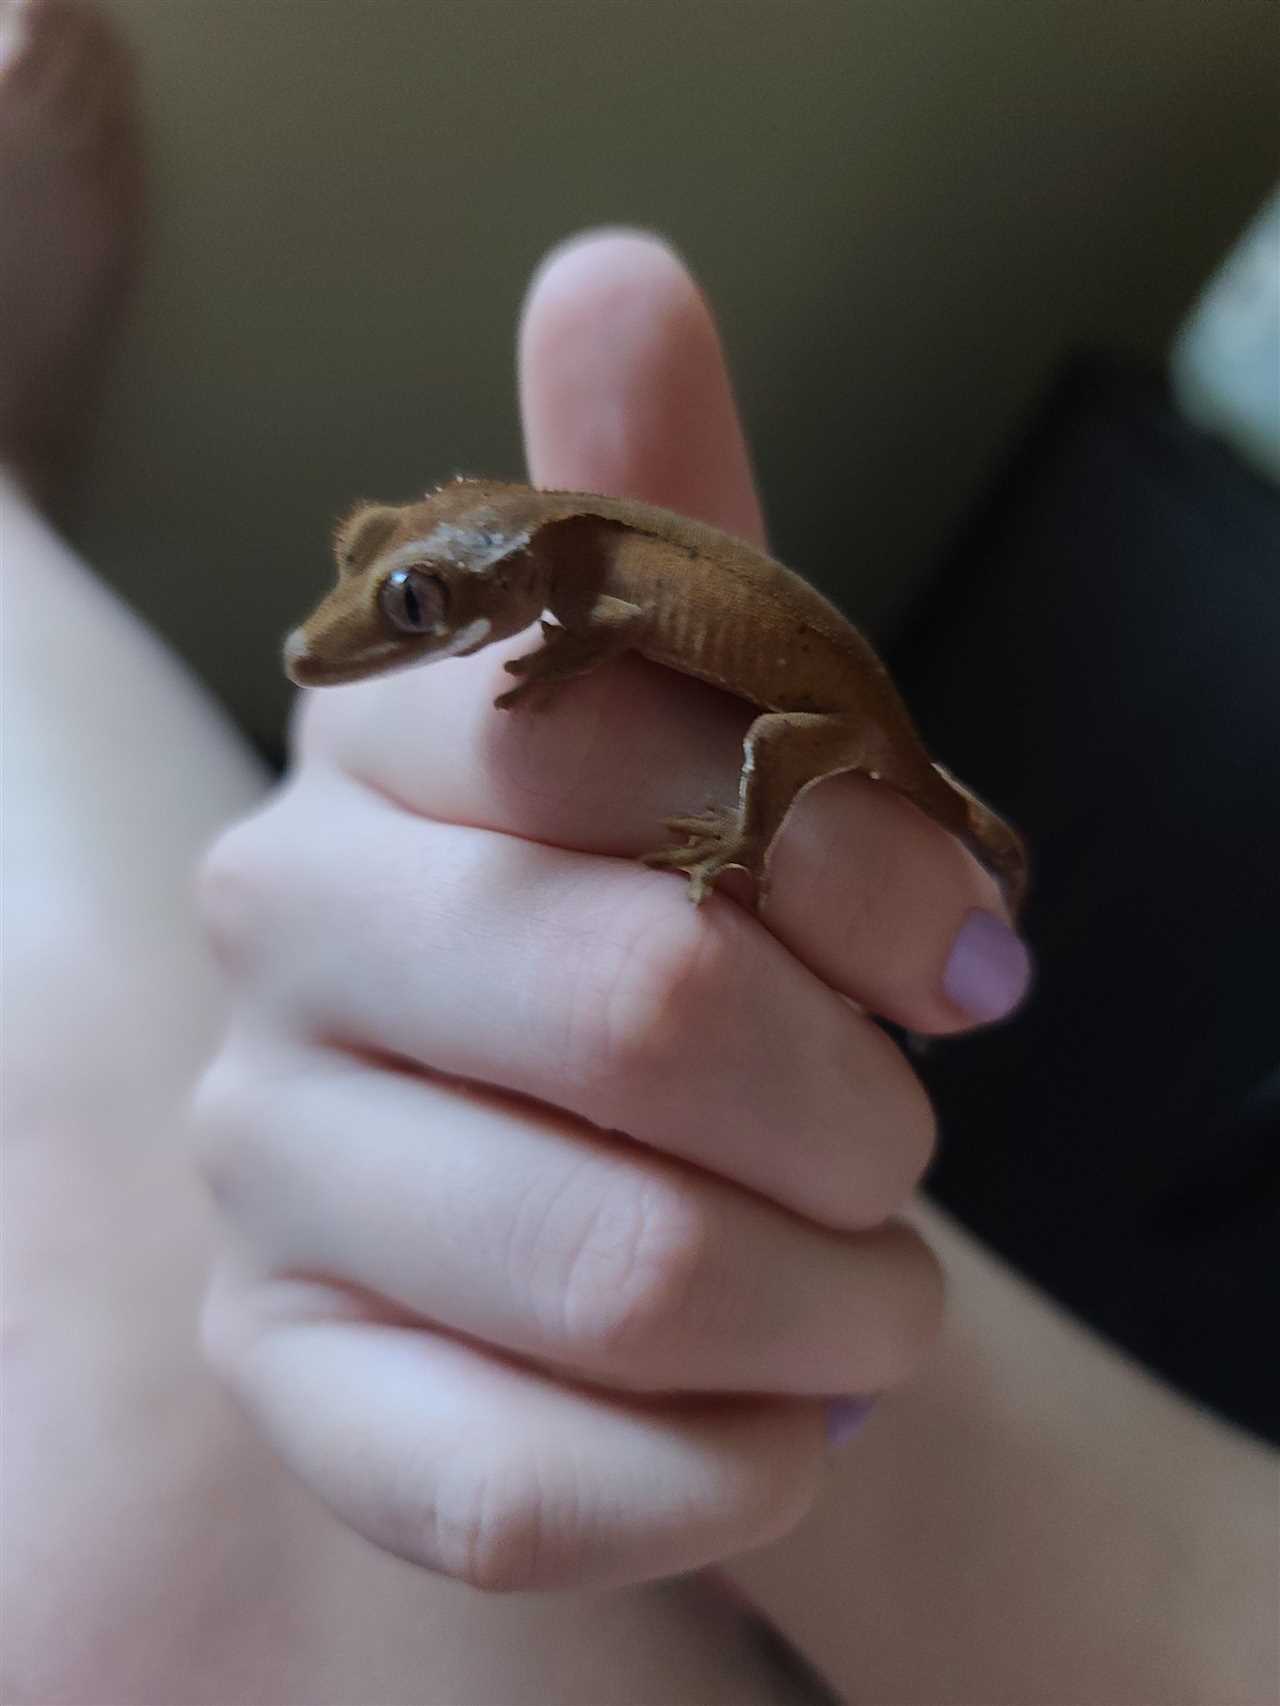 Why is My Crested Gecko Pale? Genetic Influences